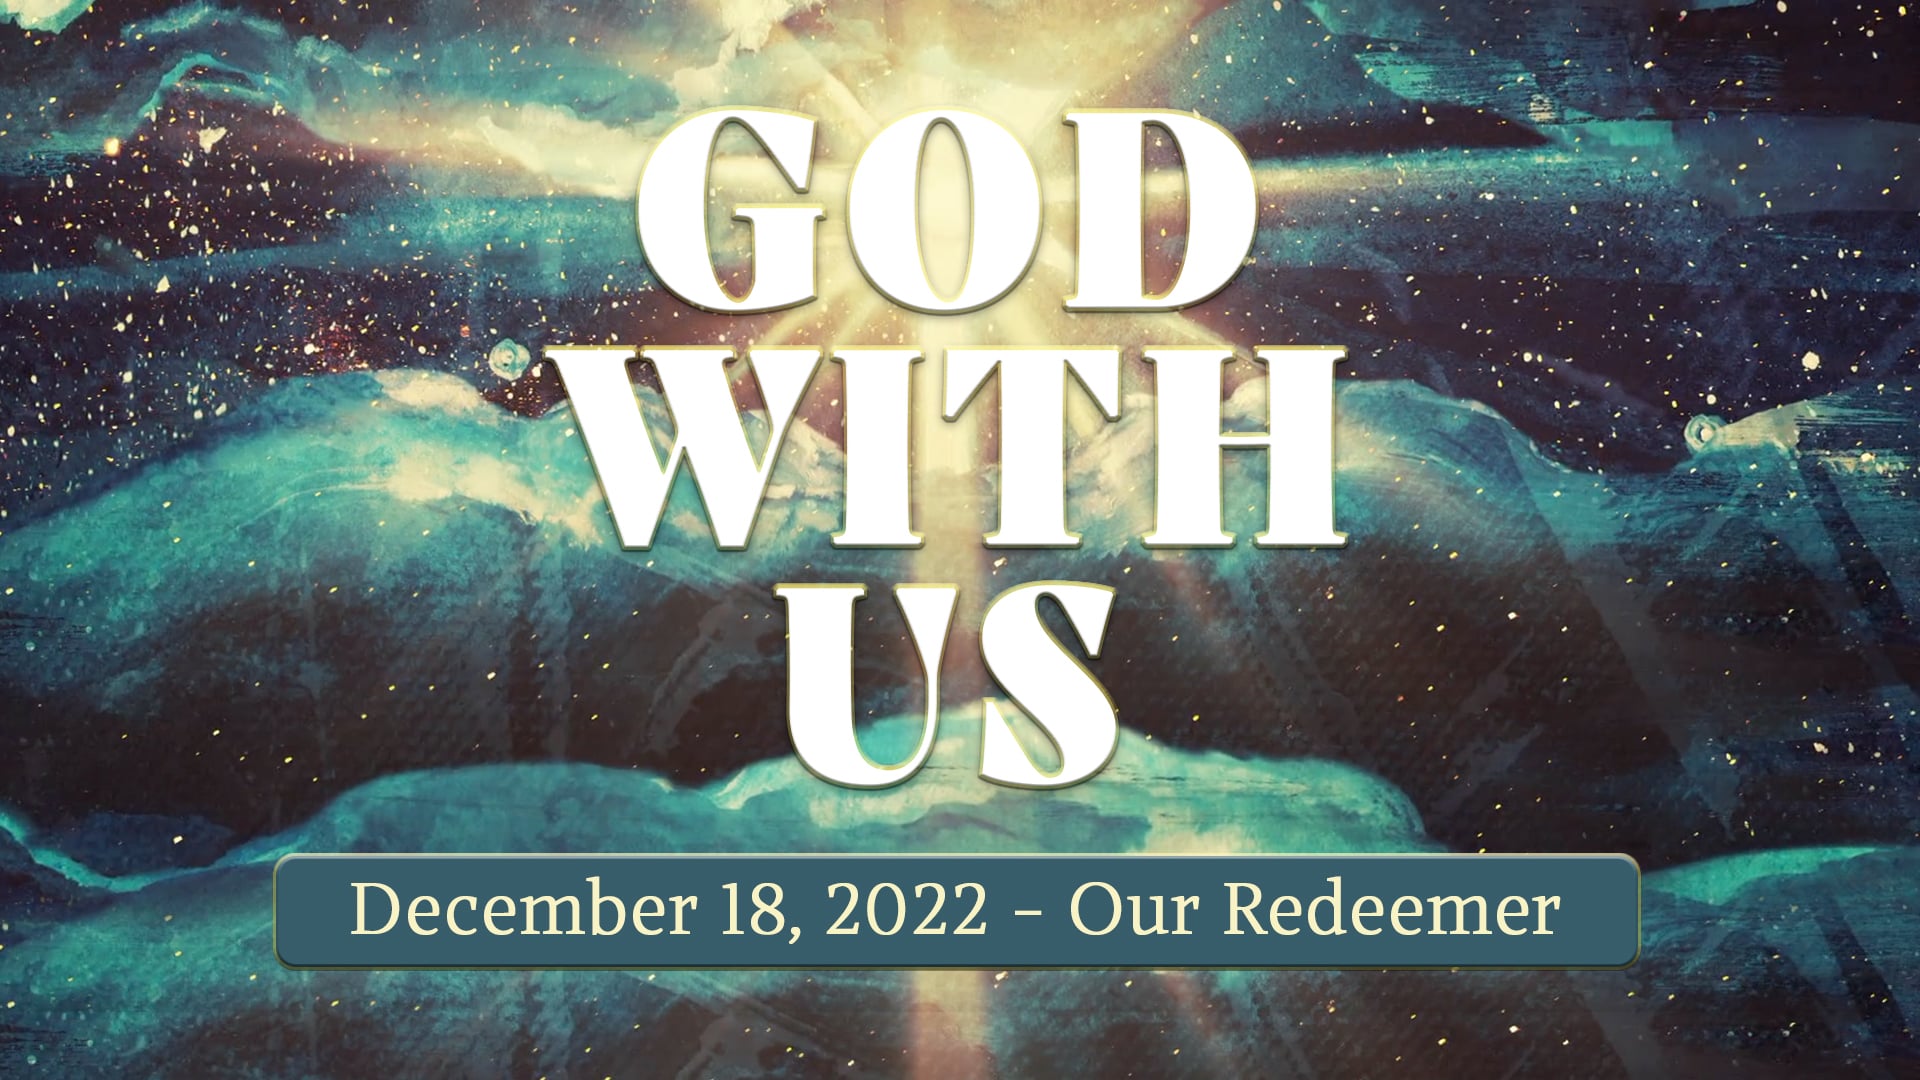 December 18, 2022 - God With Us: Our Redeemer